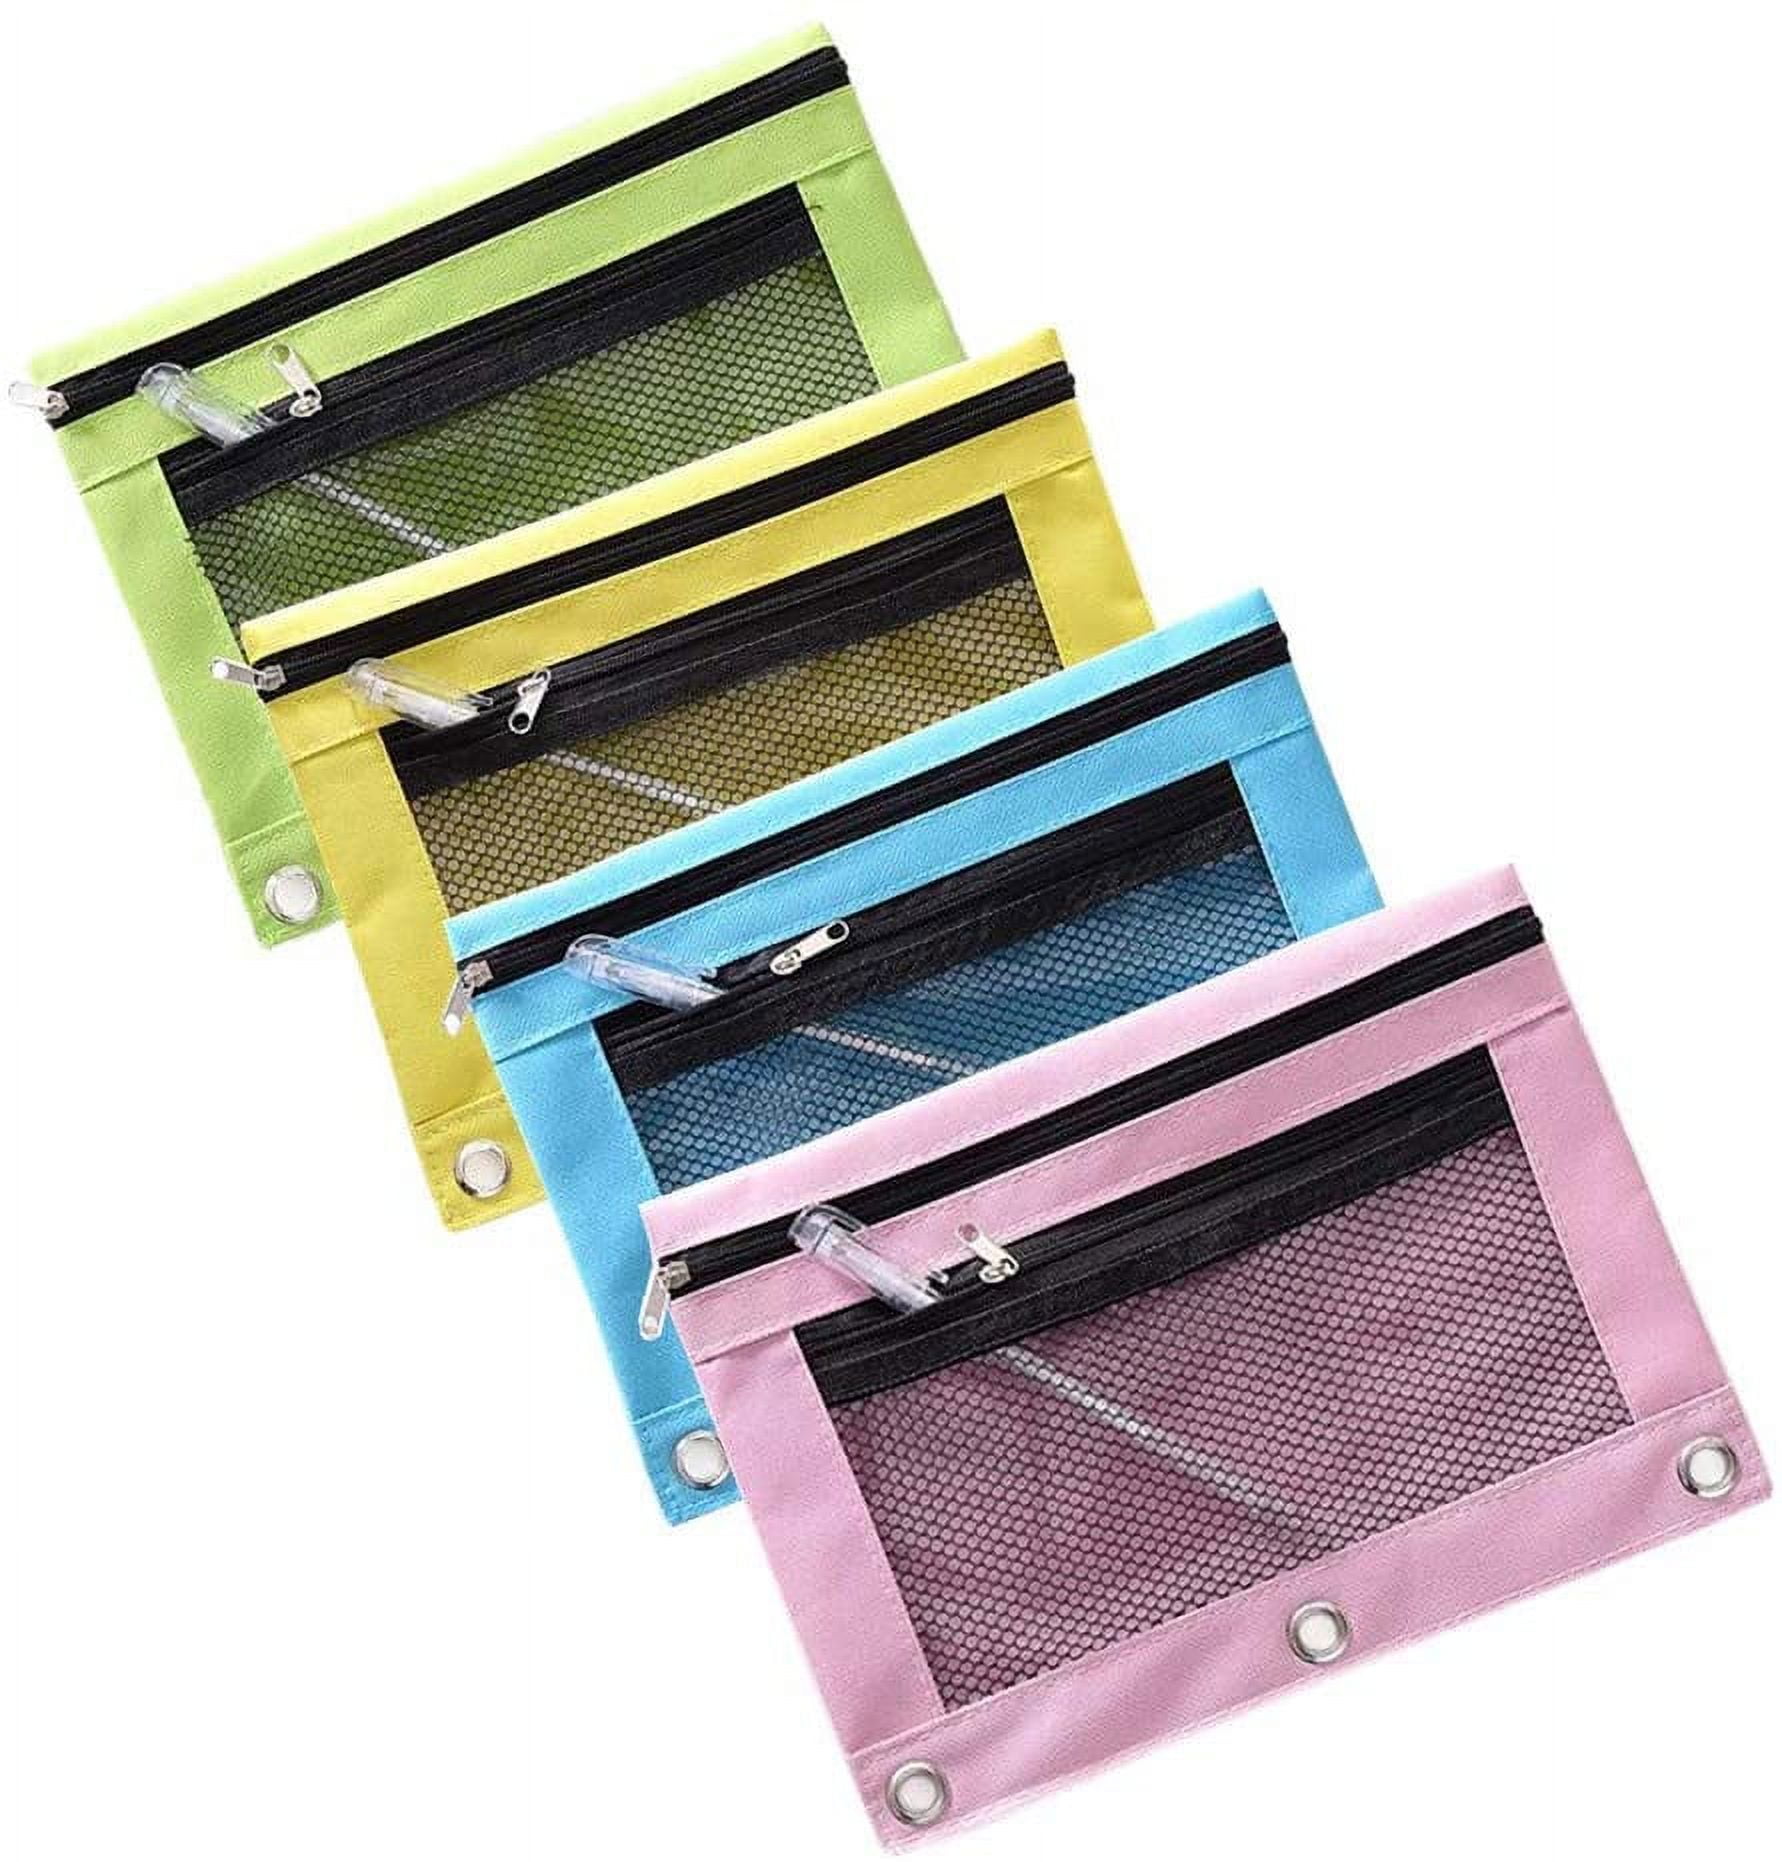  YoeeJob Pencil Pouch for 3 Ring Binder，Zipper Pencil Pouches  Bulk，Pencil Case Pouch with Clear Window for Class, School, Office, 6  Colors-24 Packs : Office Products